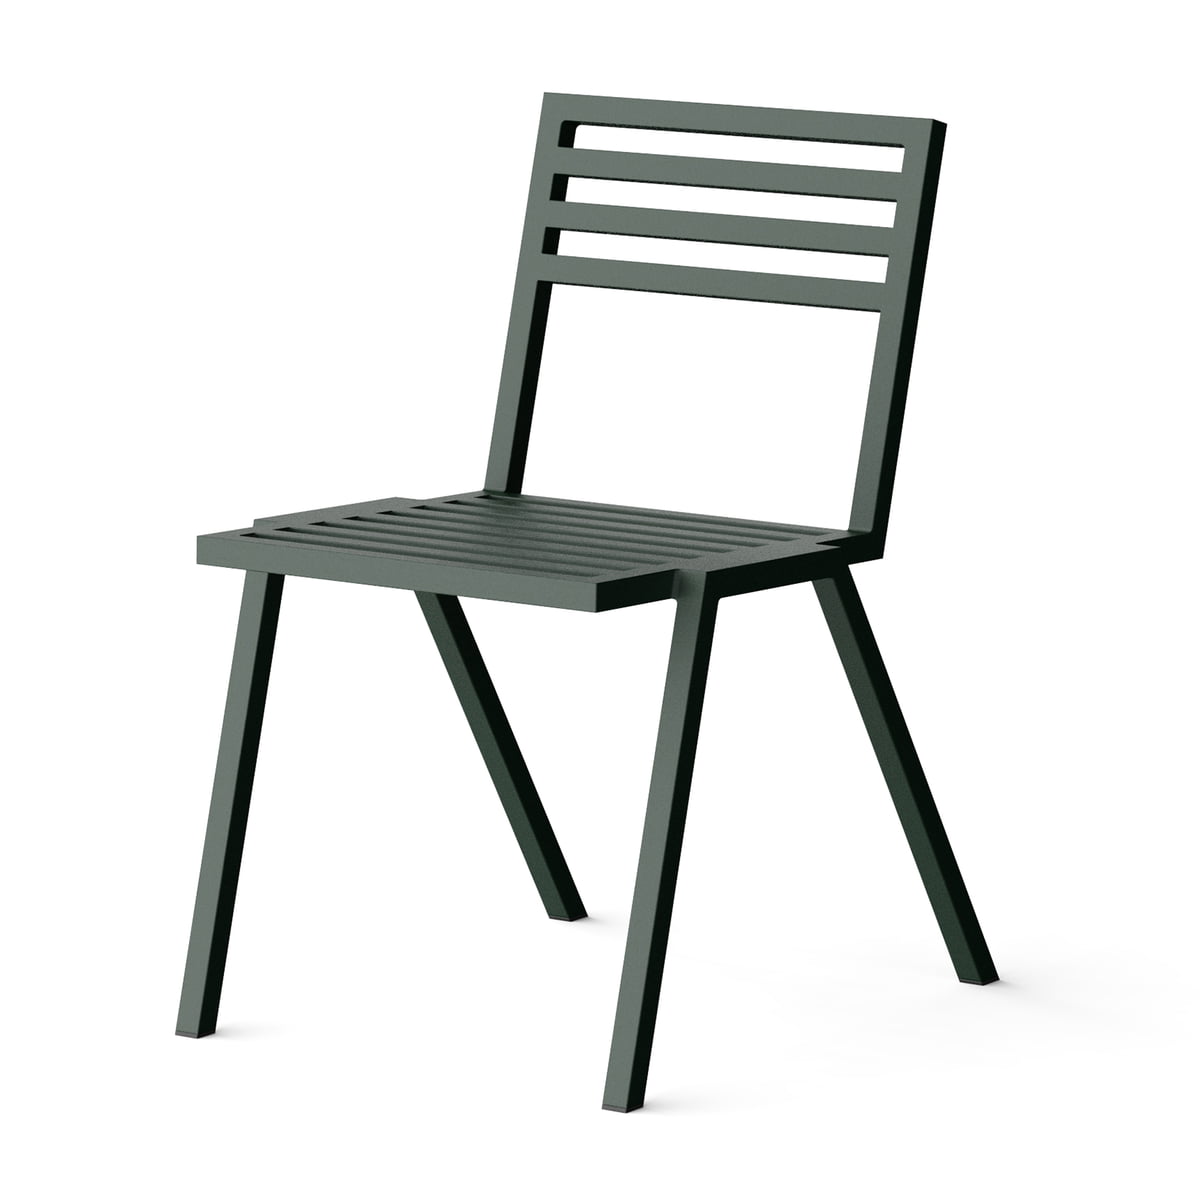 NINE - 19 Outdoors Stacking Chair